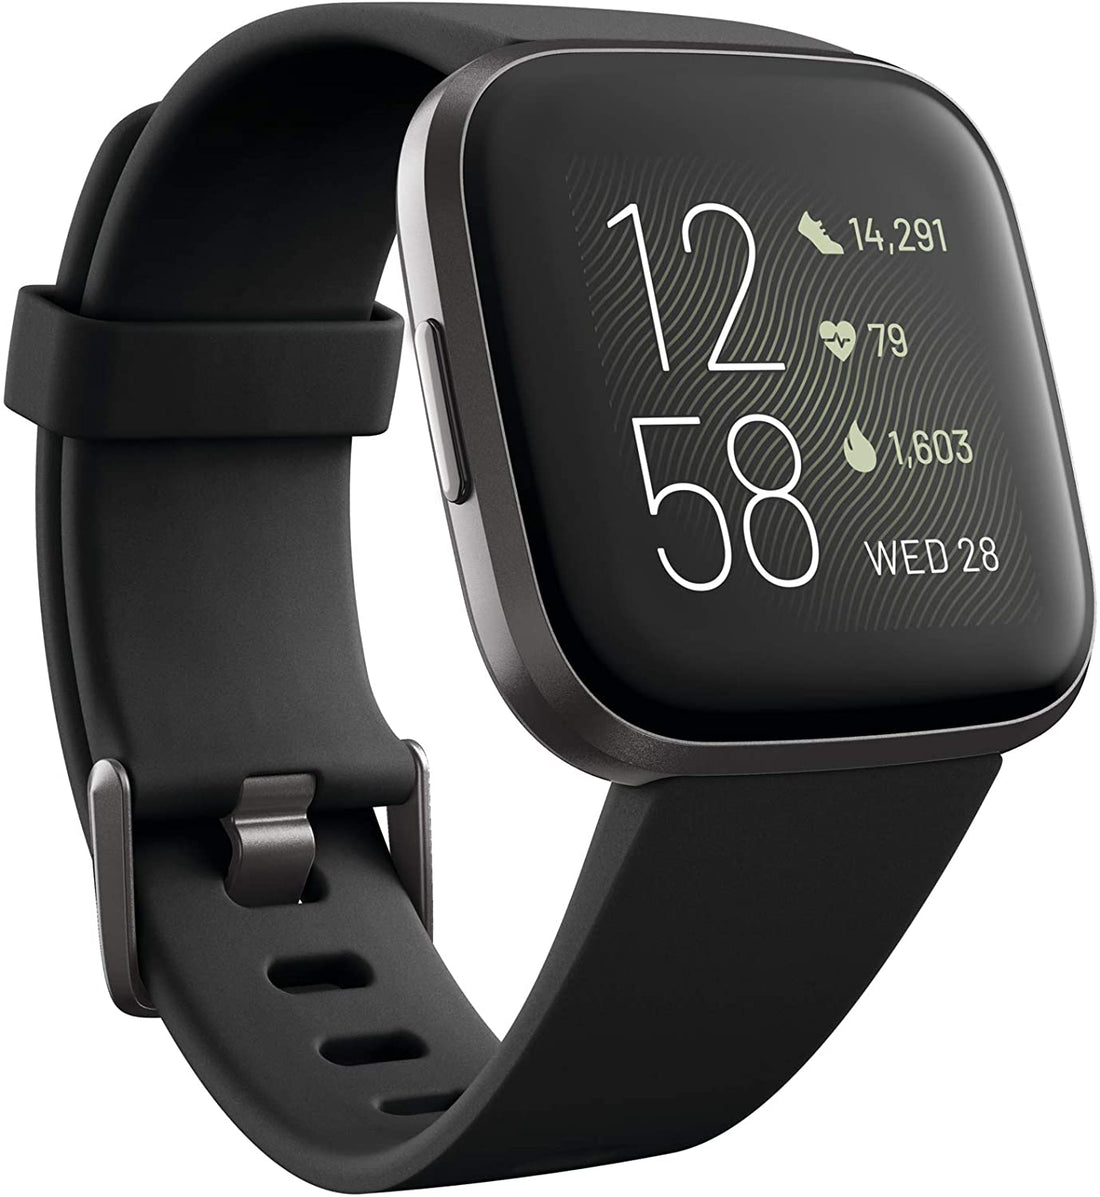 Fitbit Versa 2 Smart Watch with Heart Rate Monitor - Black / Carbon